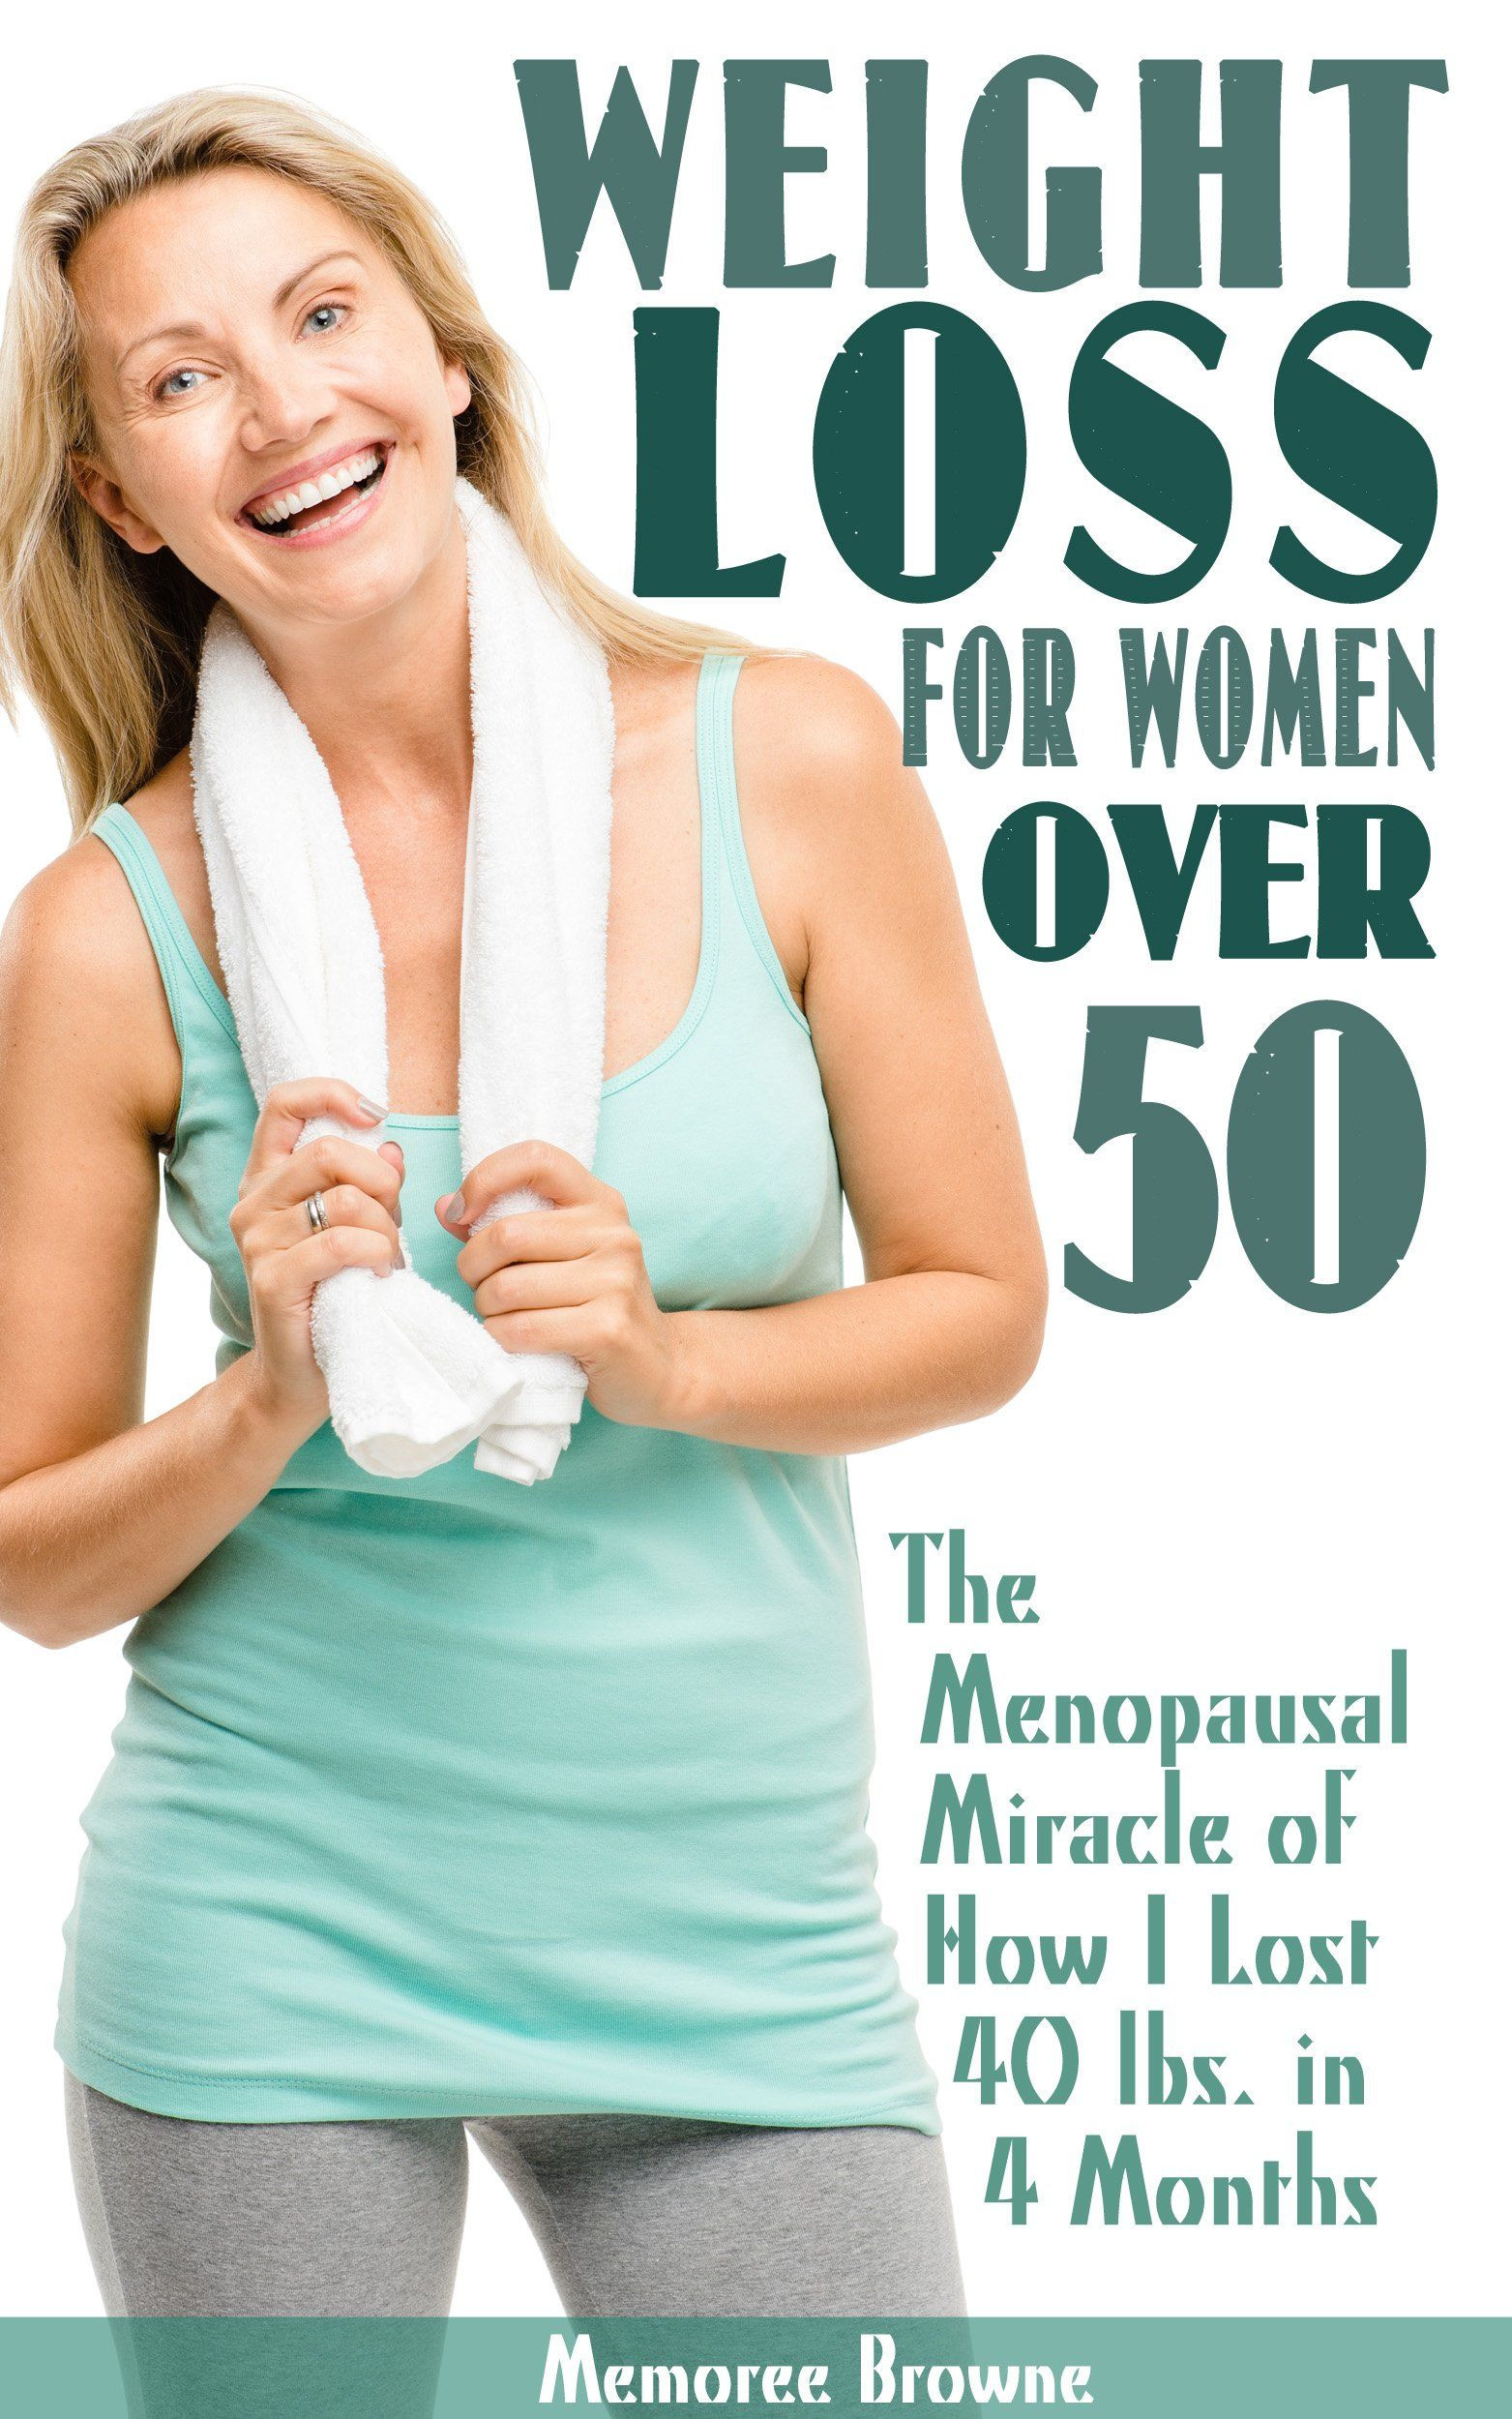 Weight Loss Meal Plans For Women Over 50
 Pin on Fitness